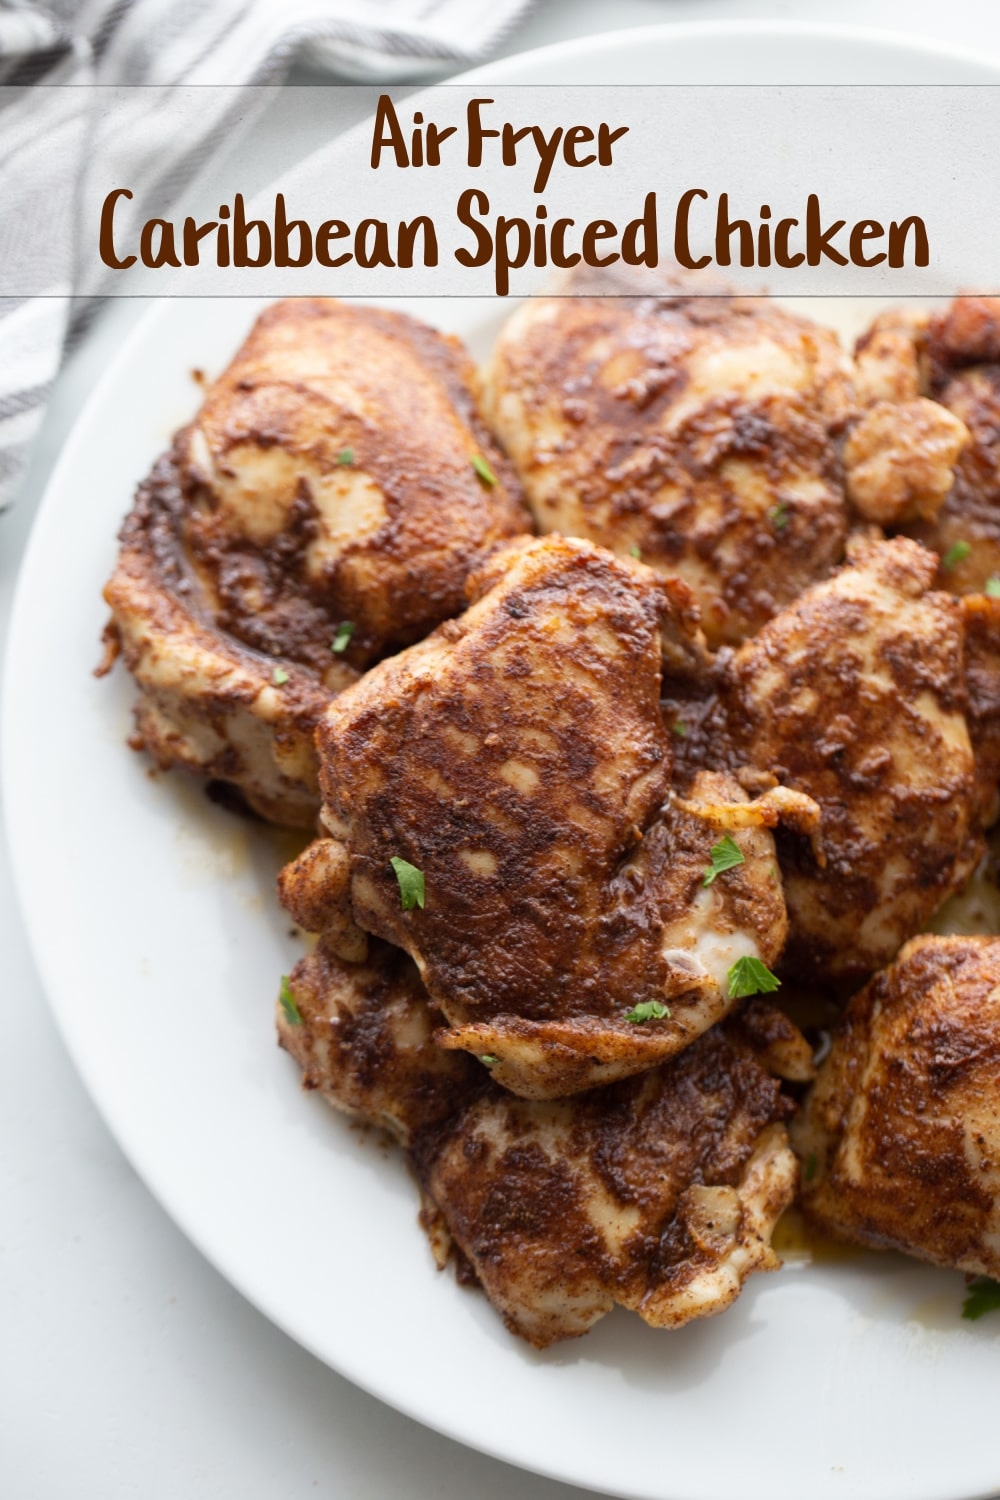 Every bite of this spiced Caribbean chicken made in the air fryer is juicy, luscious and a testimony to the fragrant spices, flair and exotic flavors you find in Caribbean cooking. As usual, the air fryer locks in the juiciness and creates the perfect chicken every time.  via @cmpollak1